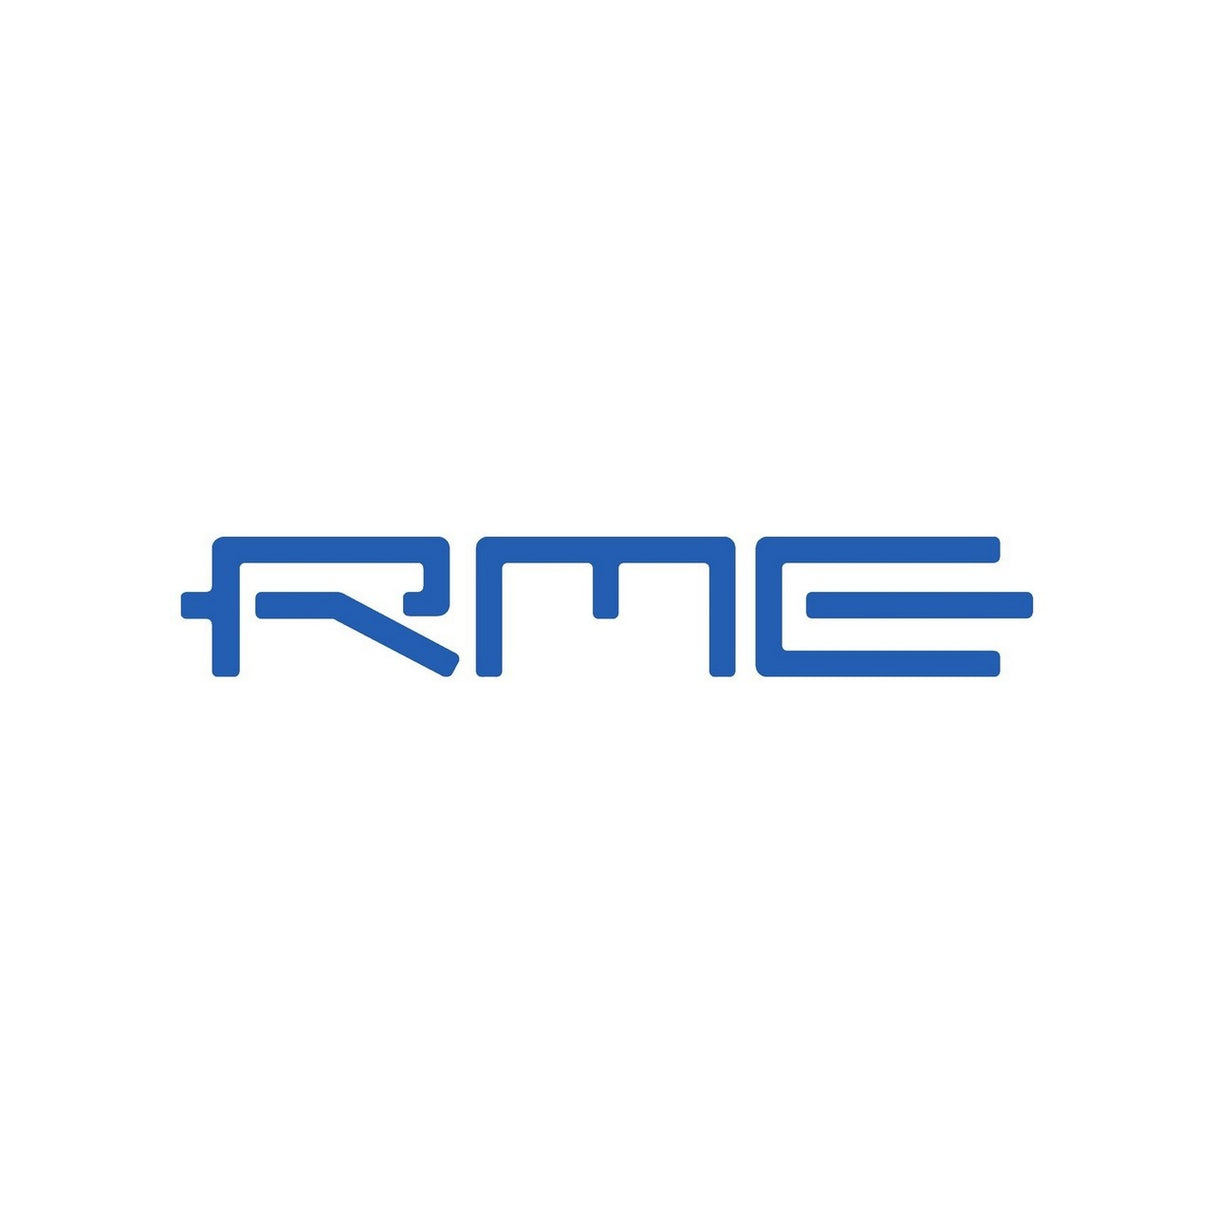 RME RE1-NEW | Replacement Rack Ears 1RU for UFX Plus, UFX2, FF802 Packed in Pairs